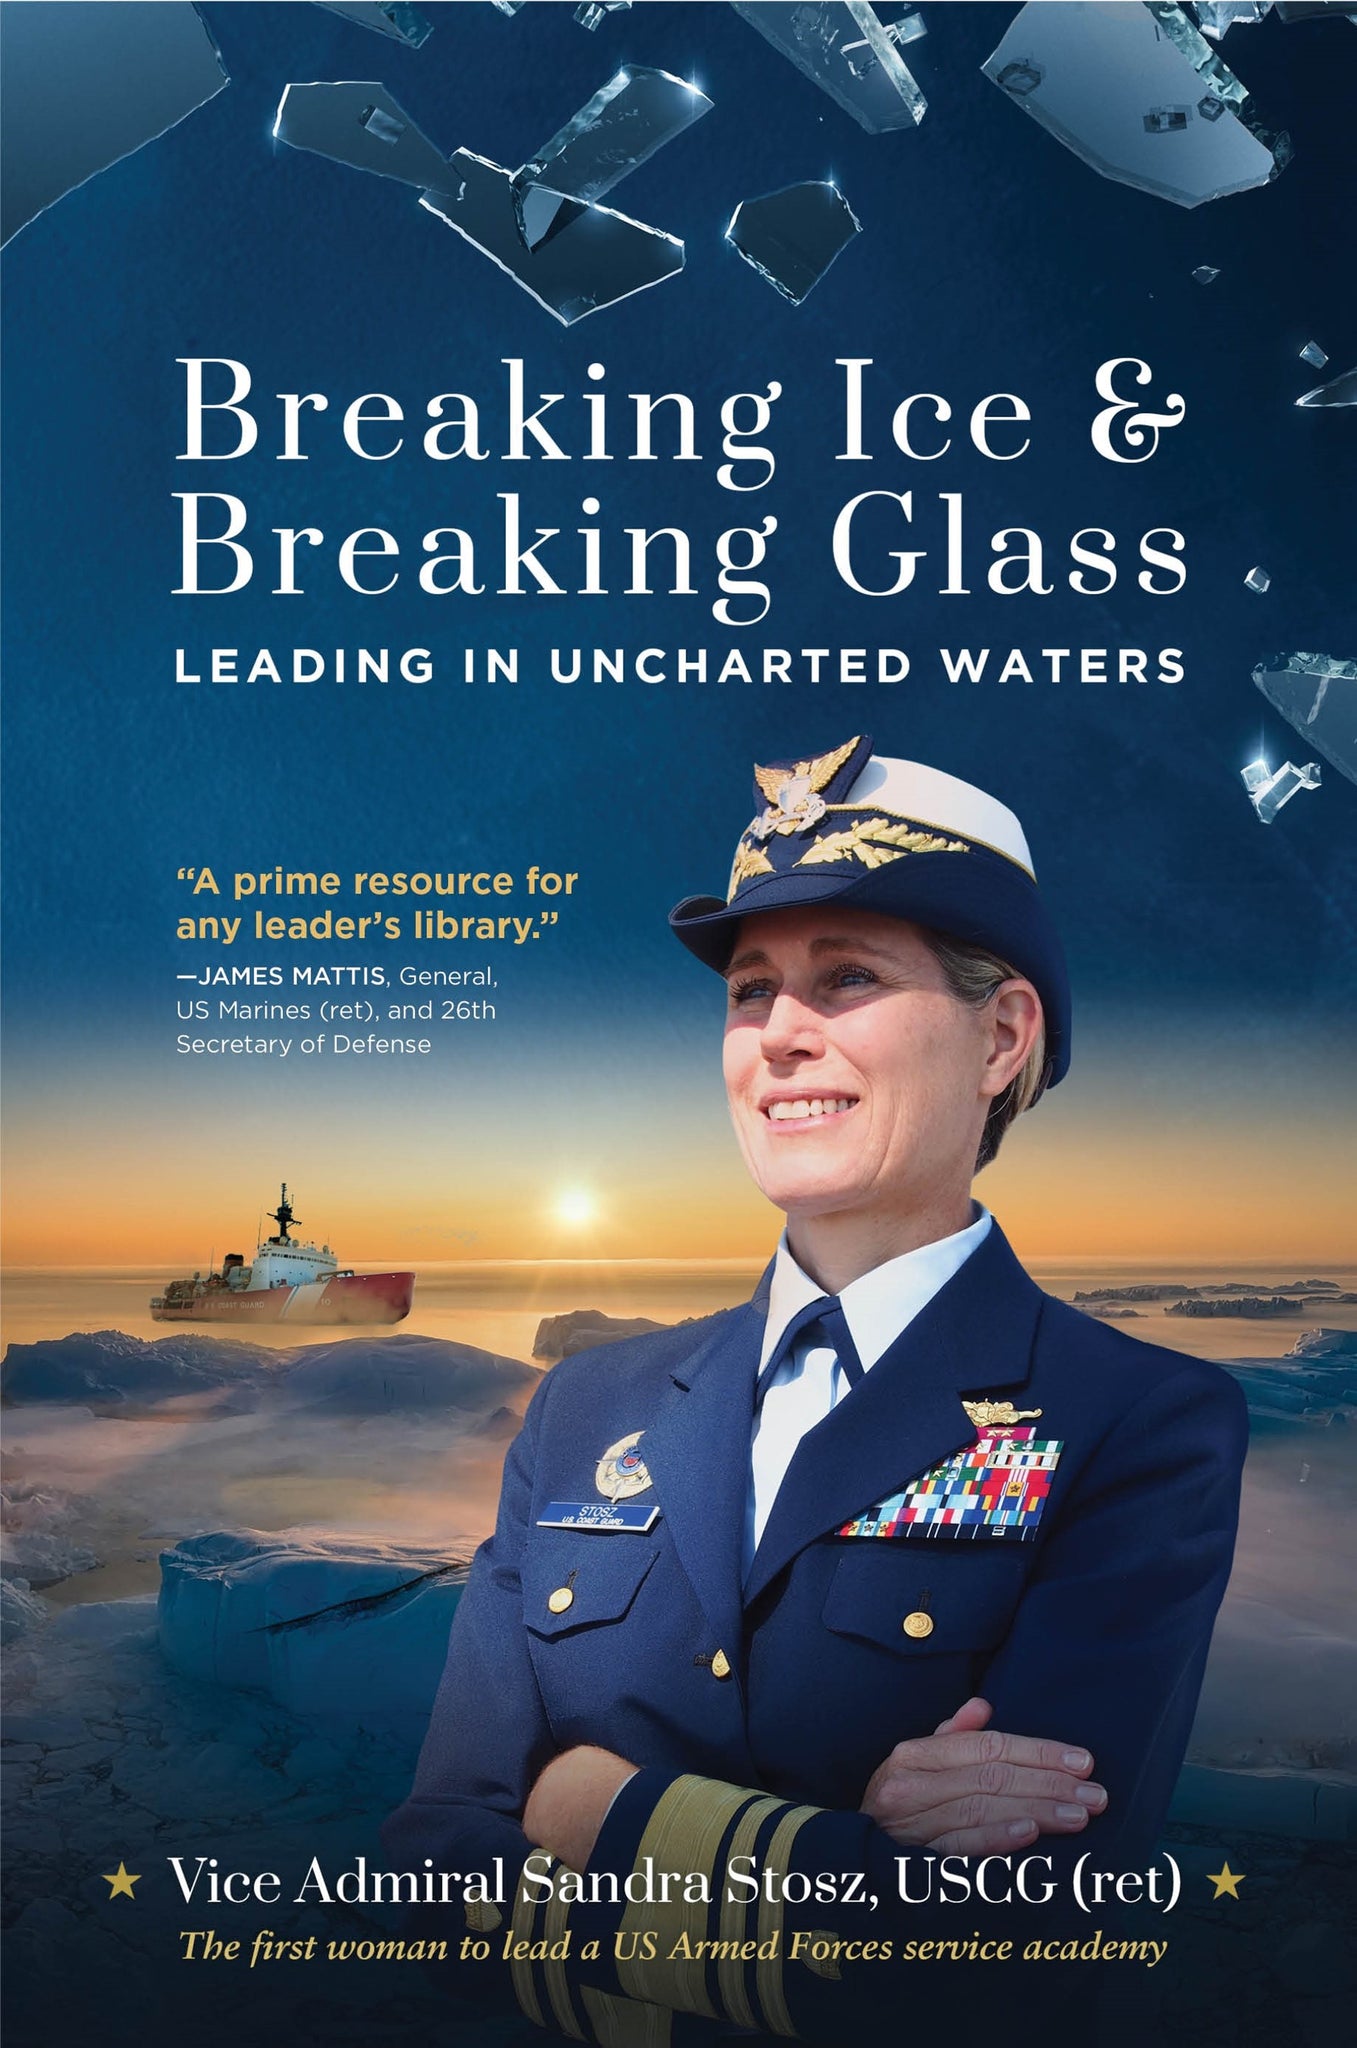 Breaking Ice and Breaking Glass: Leading in Uncharted Waters by Vice Admiral Sandra Stosz Uscg (Ret)